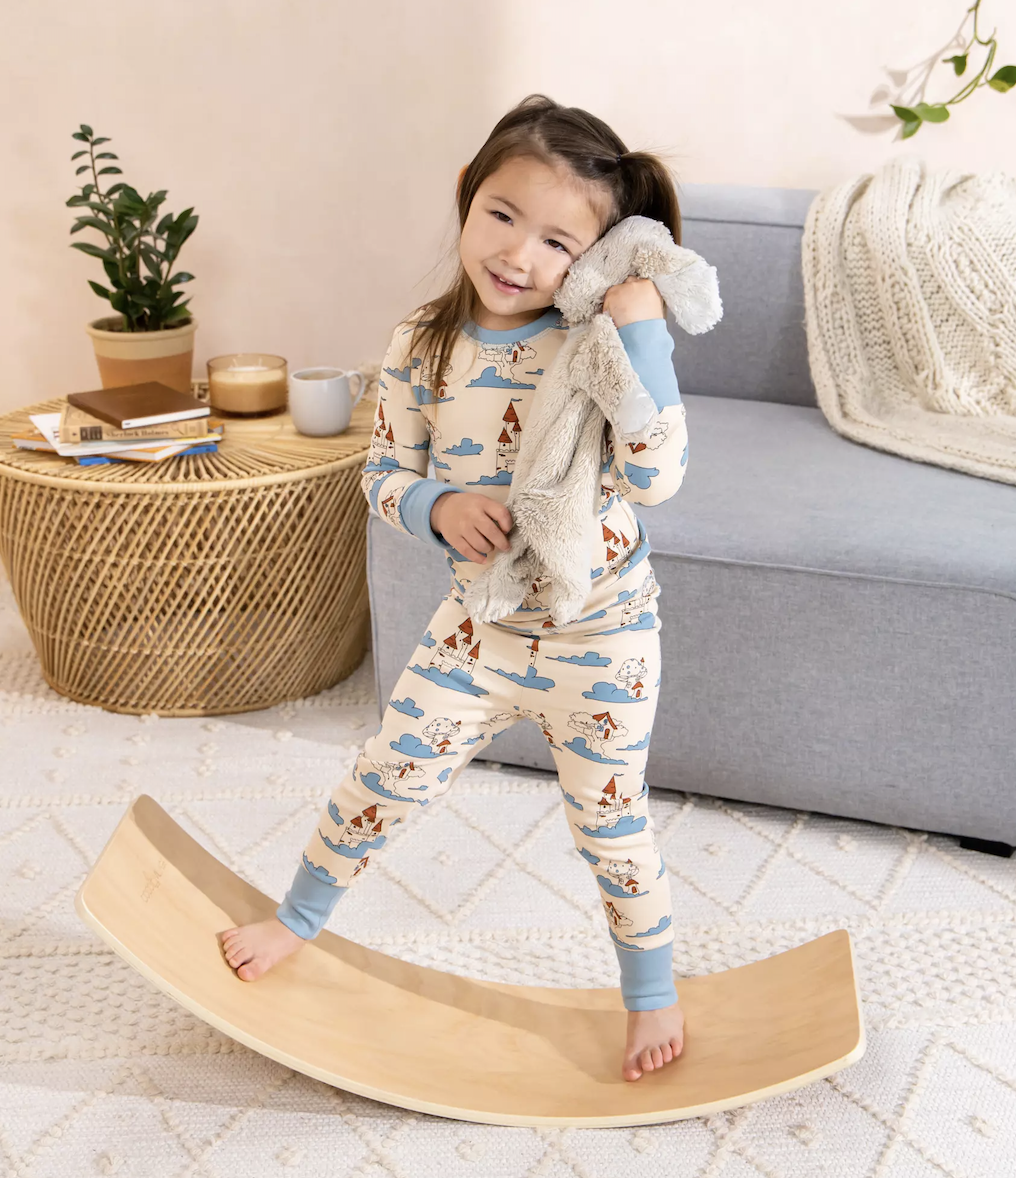 child balancing on curved board